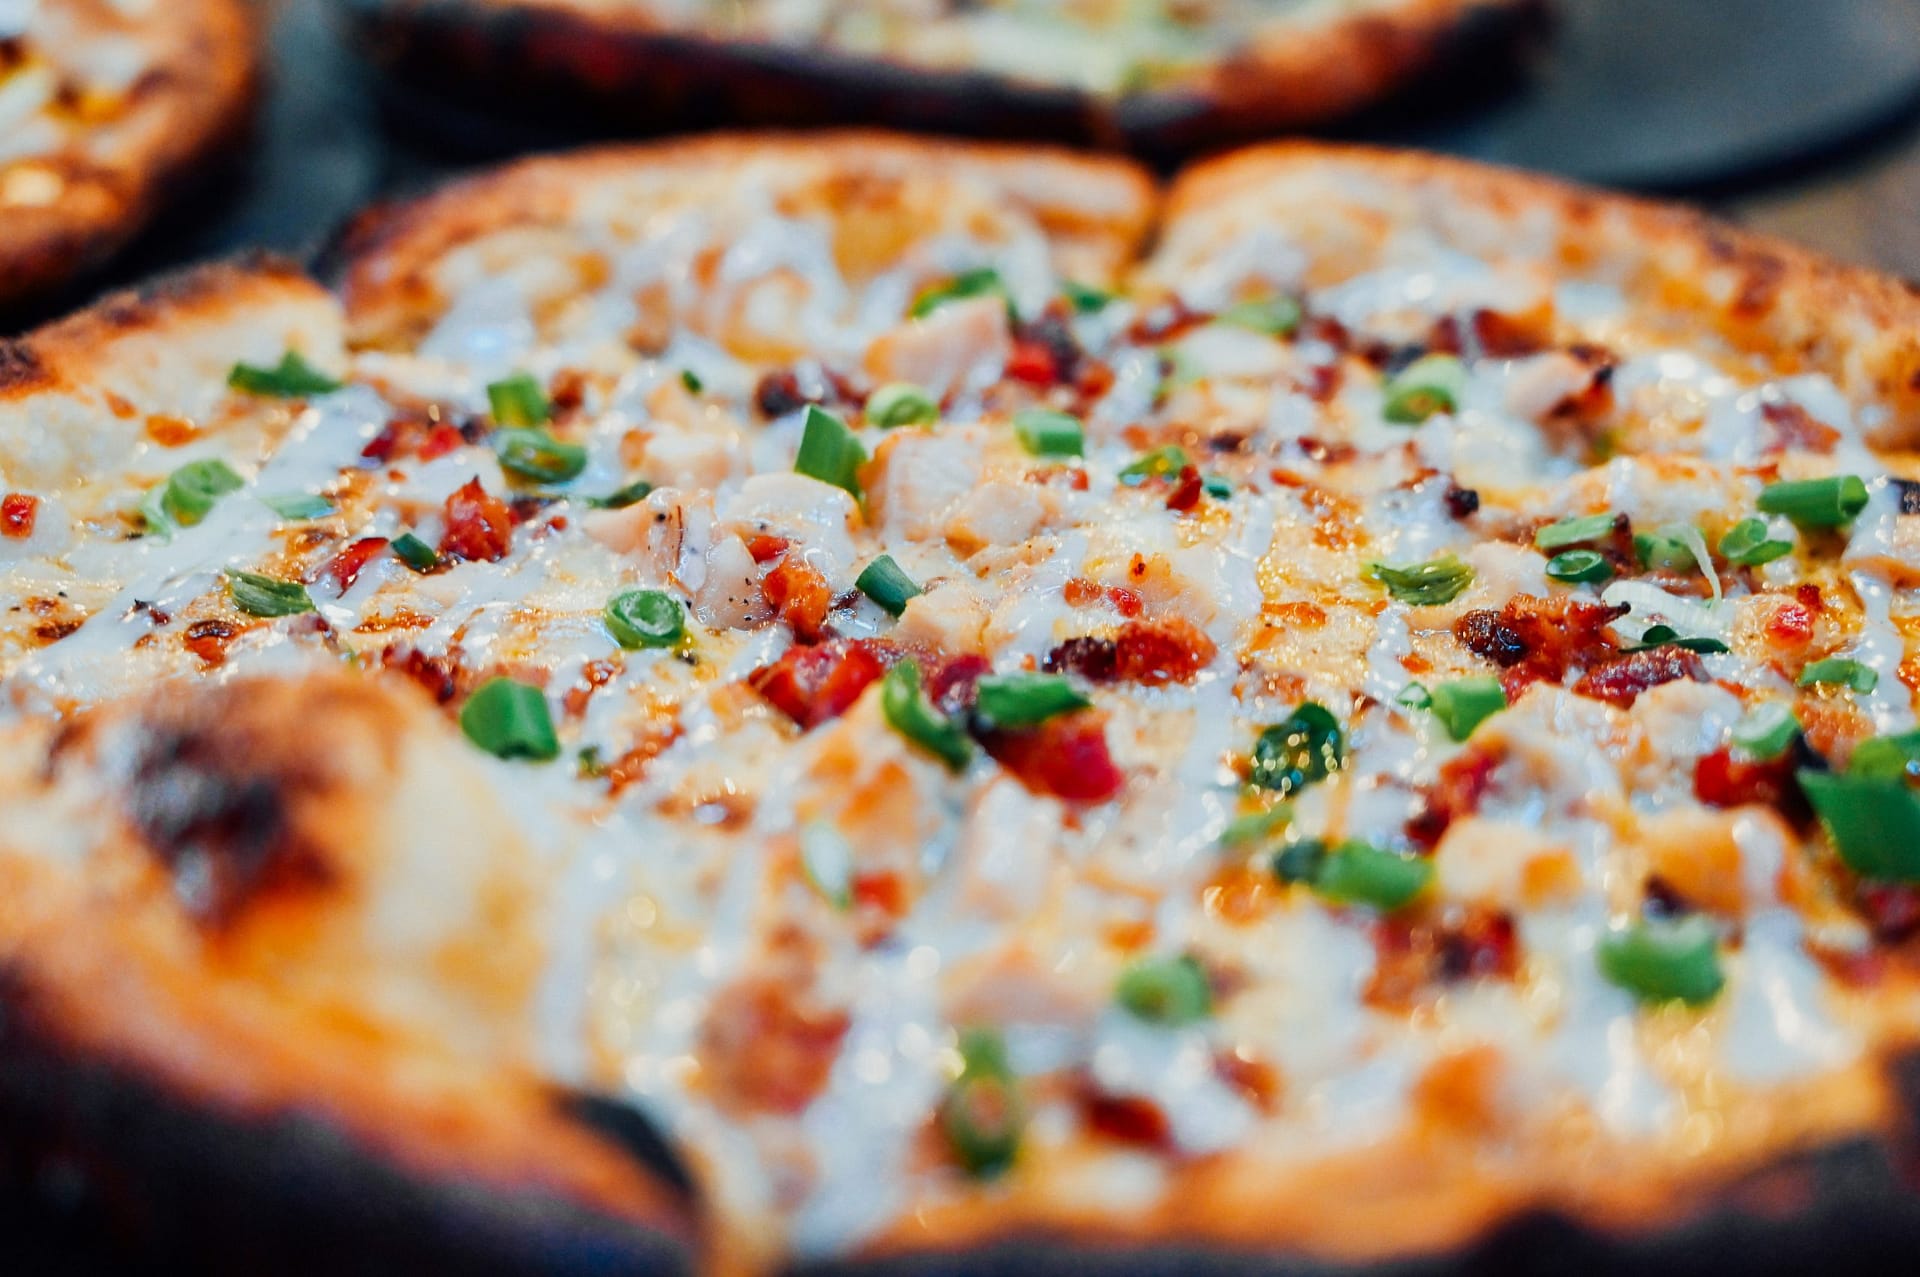 A close-up photograph of craft pizza at Crafty Squirrel in Downtown, St. Petersburg